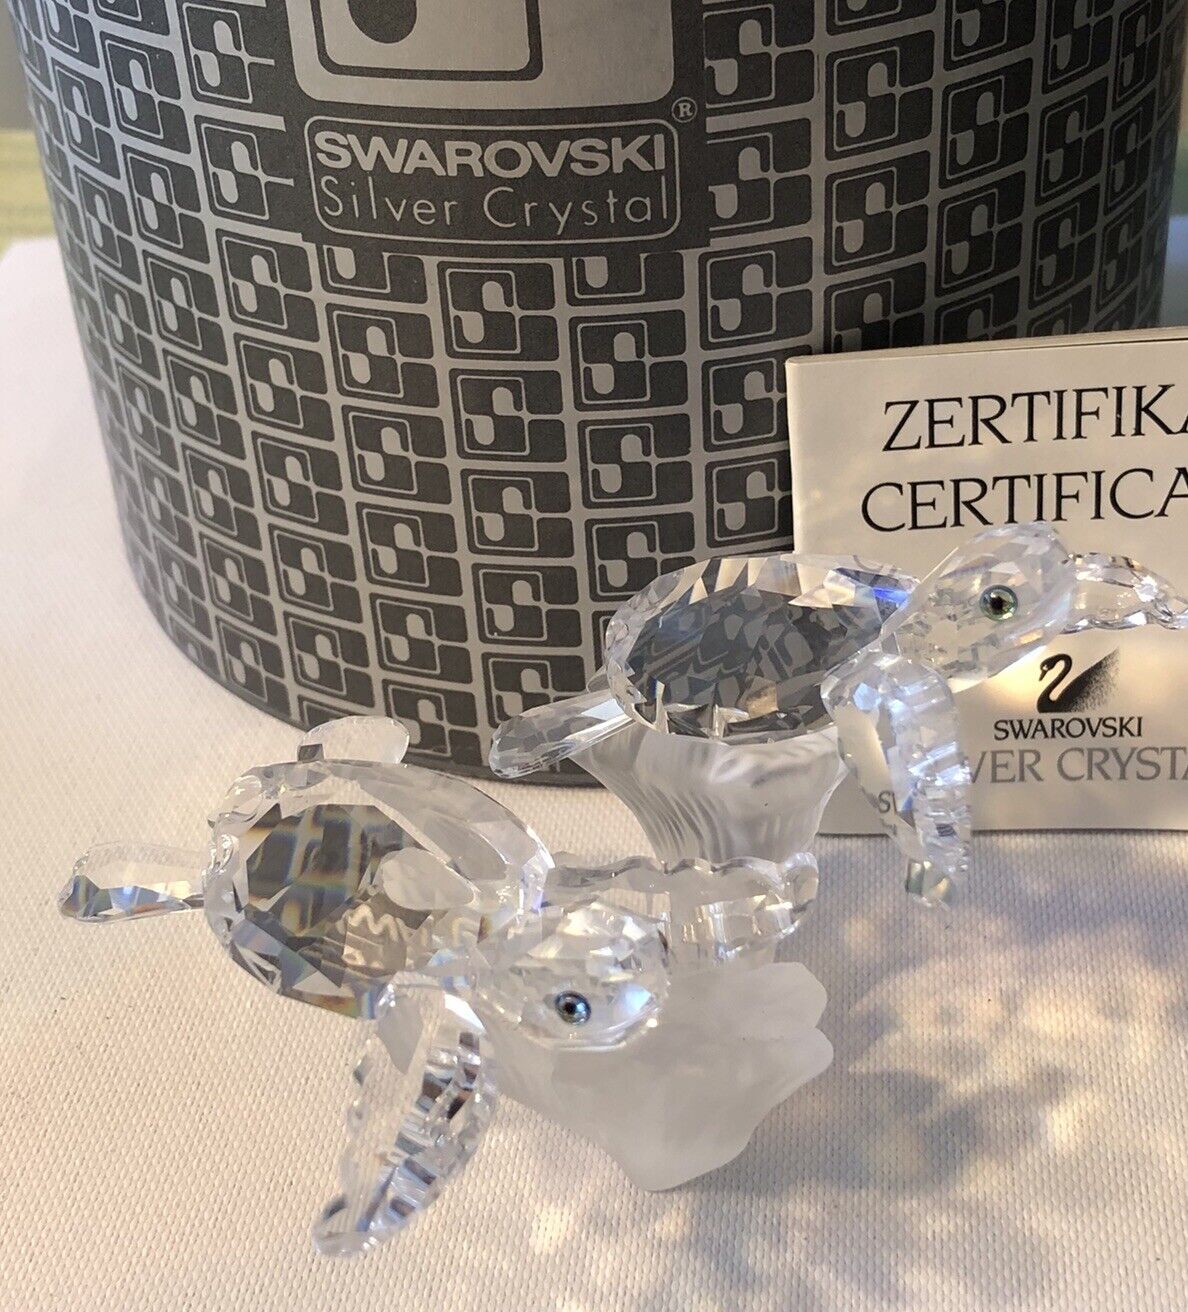 Swarovski Crystal 9100 000 016 Baby Sea Turtles 826480 In Replacement Box